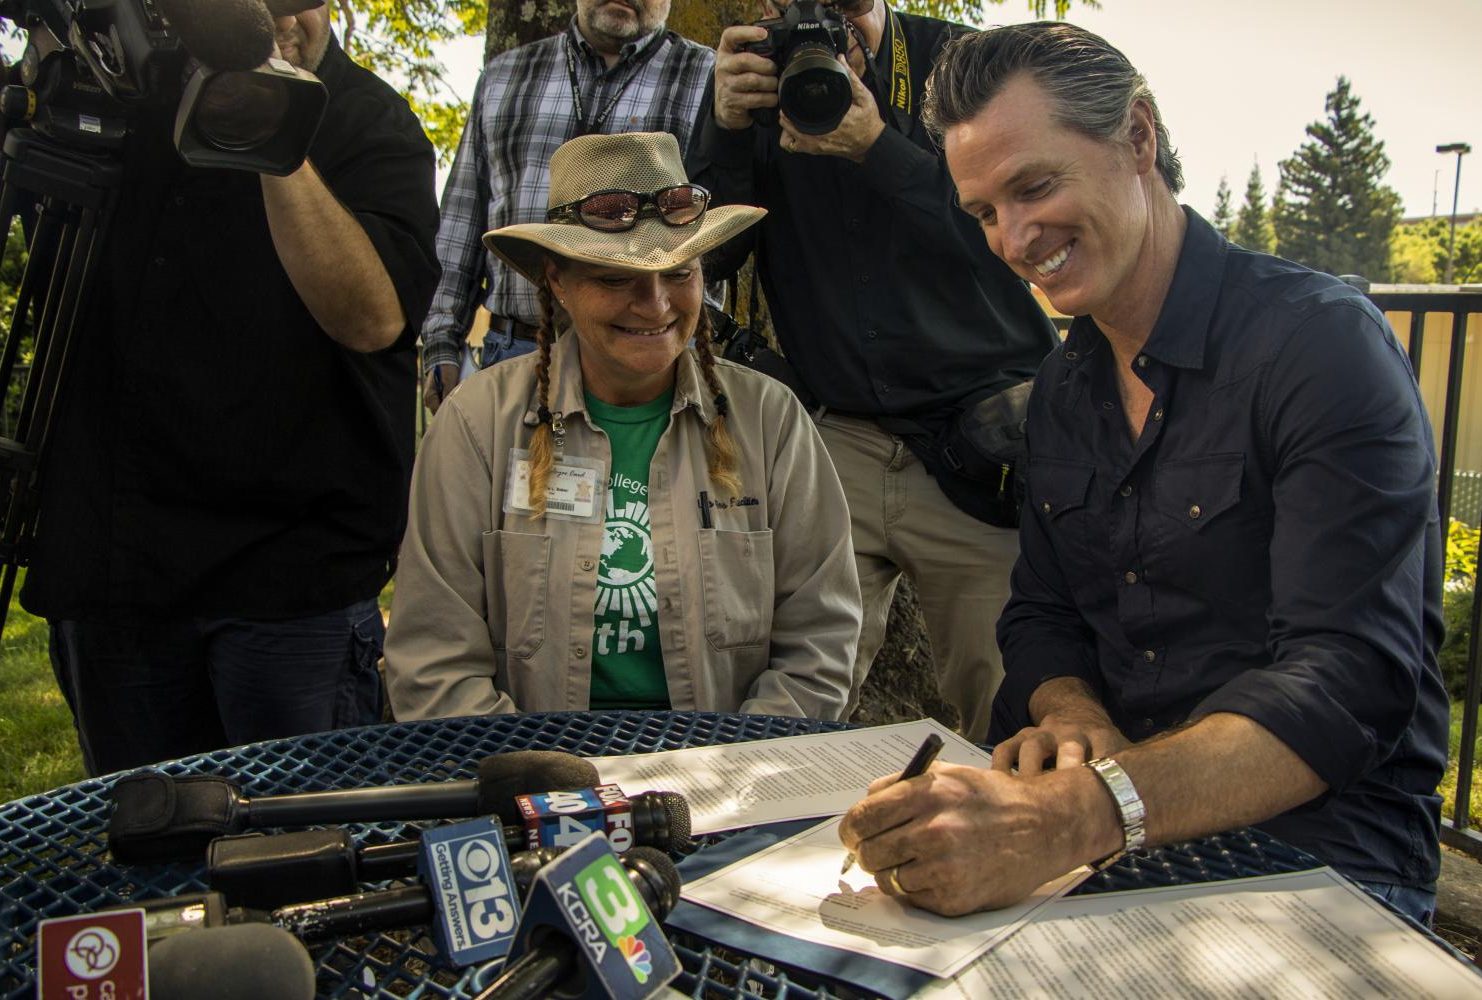 Governor Gavin Newsom signs a executive order about the advancements of automation in the work force during International Workers’ Day at American River College on May 1, 2019. (Photo by Ashley Hayes-Stone)